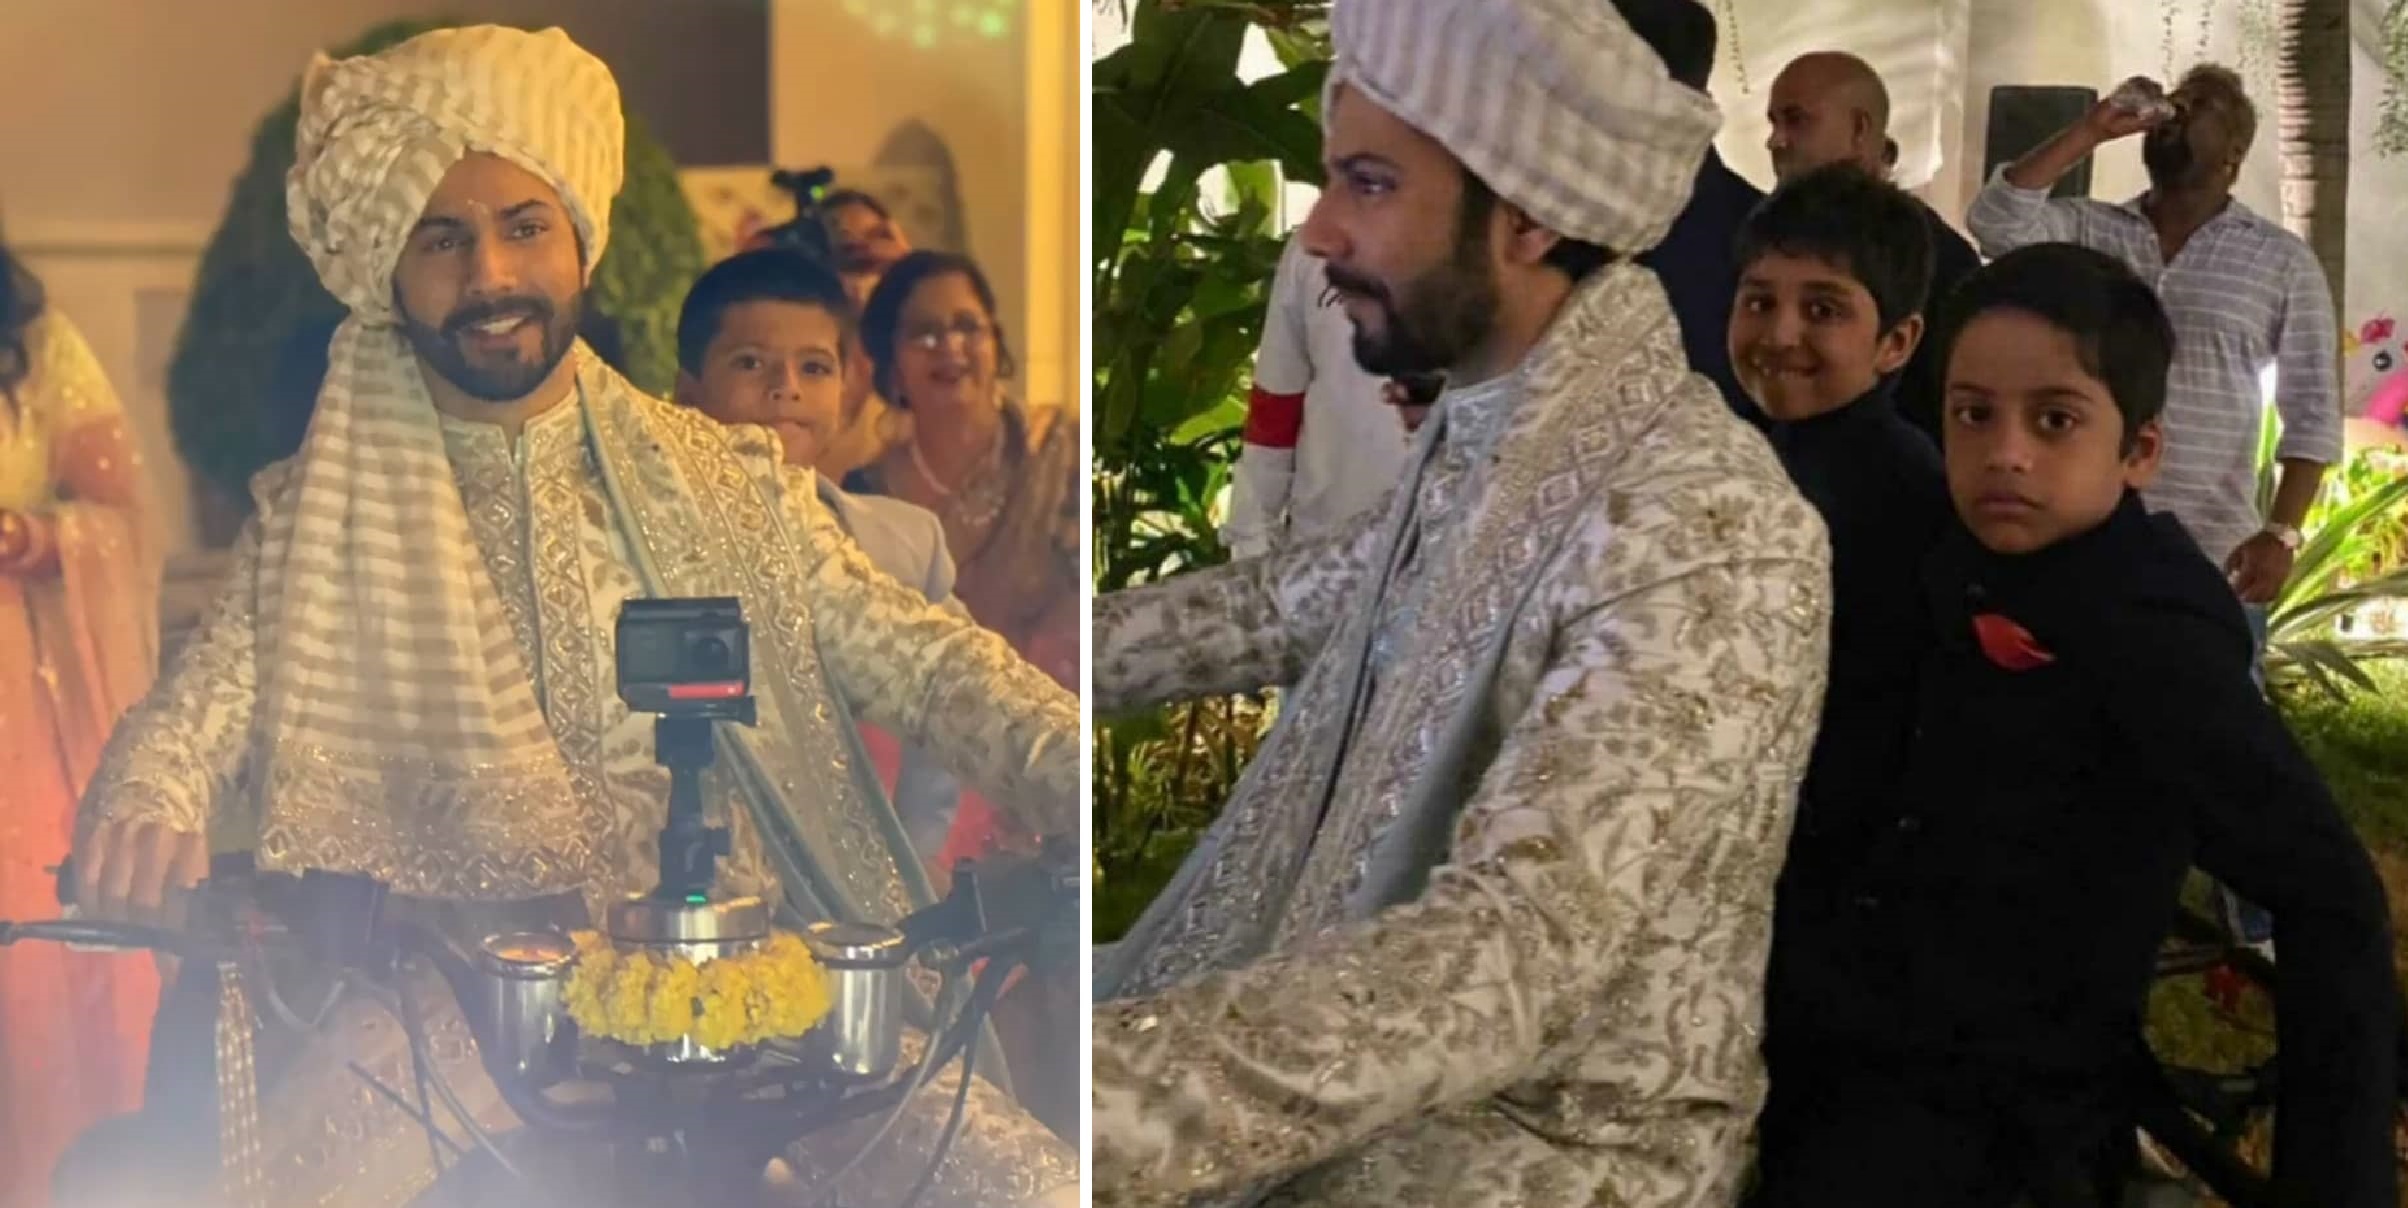 Varun Dhawan Arrived At His Shaadi In Style – On a Bike! [See Pics]